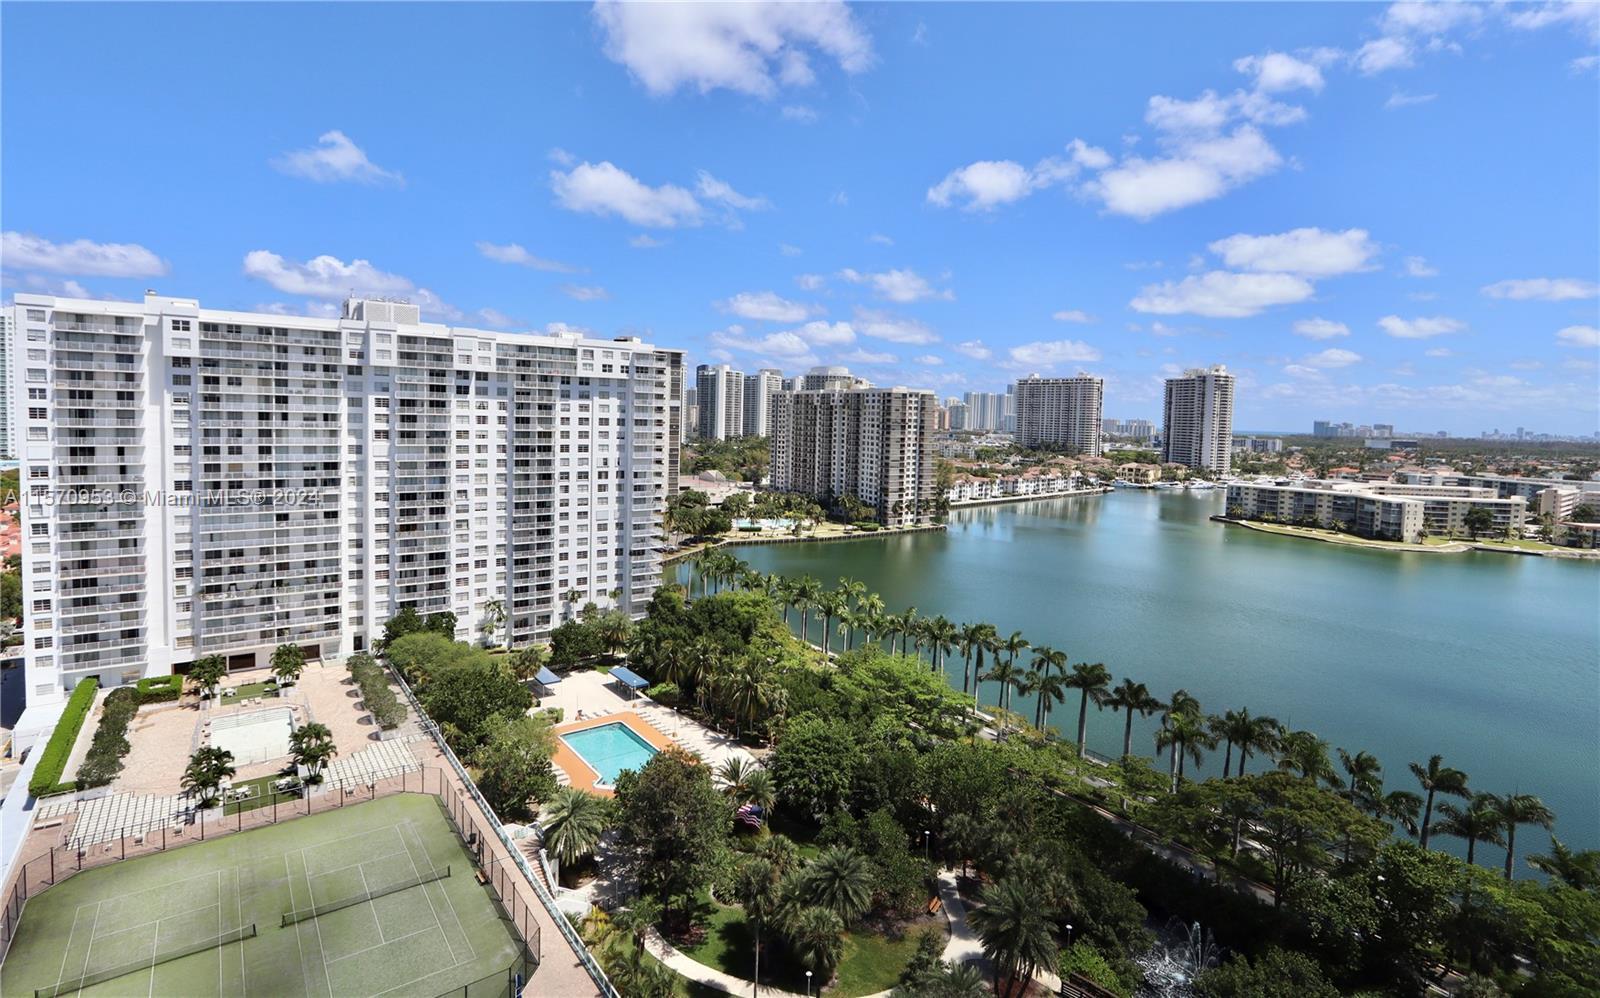 TWO (2) BEDROOM,  TWO (2) BATHS CONDOMINIUM WITH 1,466 SQUARE FT. IN AVENTURA, FLORIDA, BOASTS BREAT